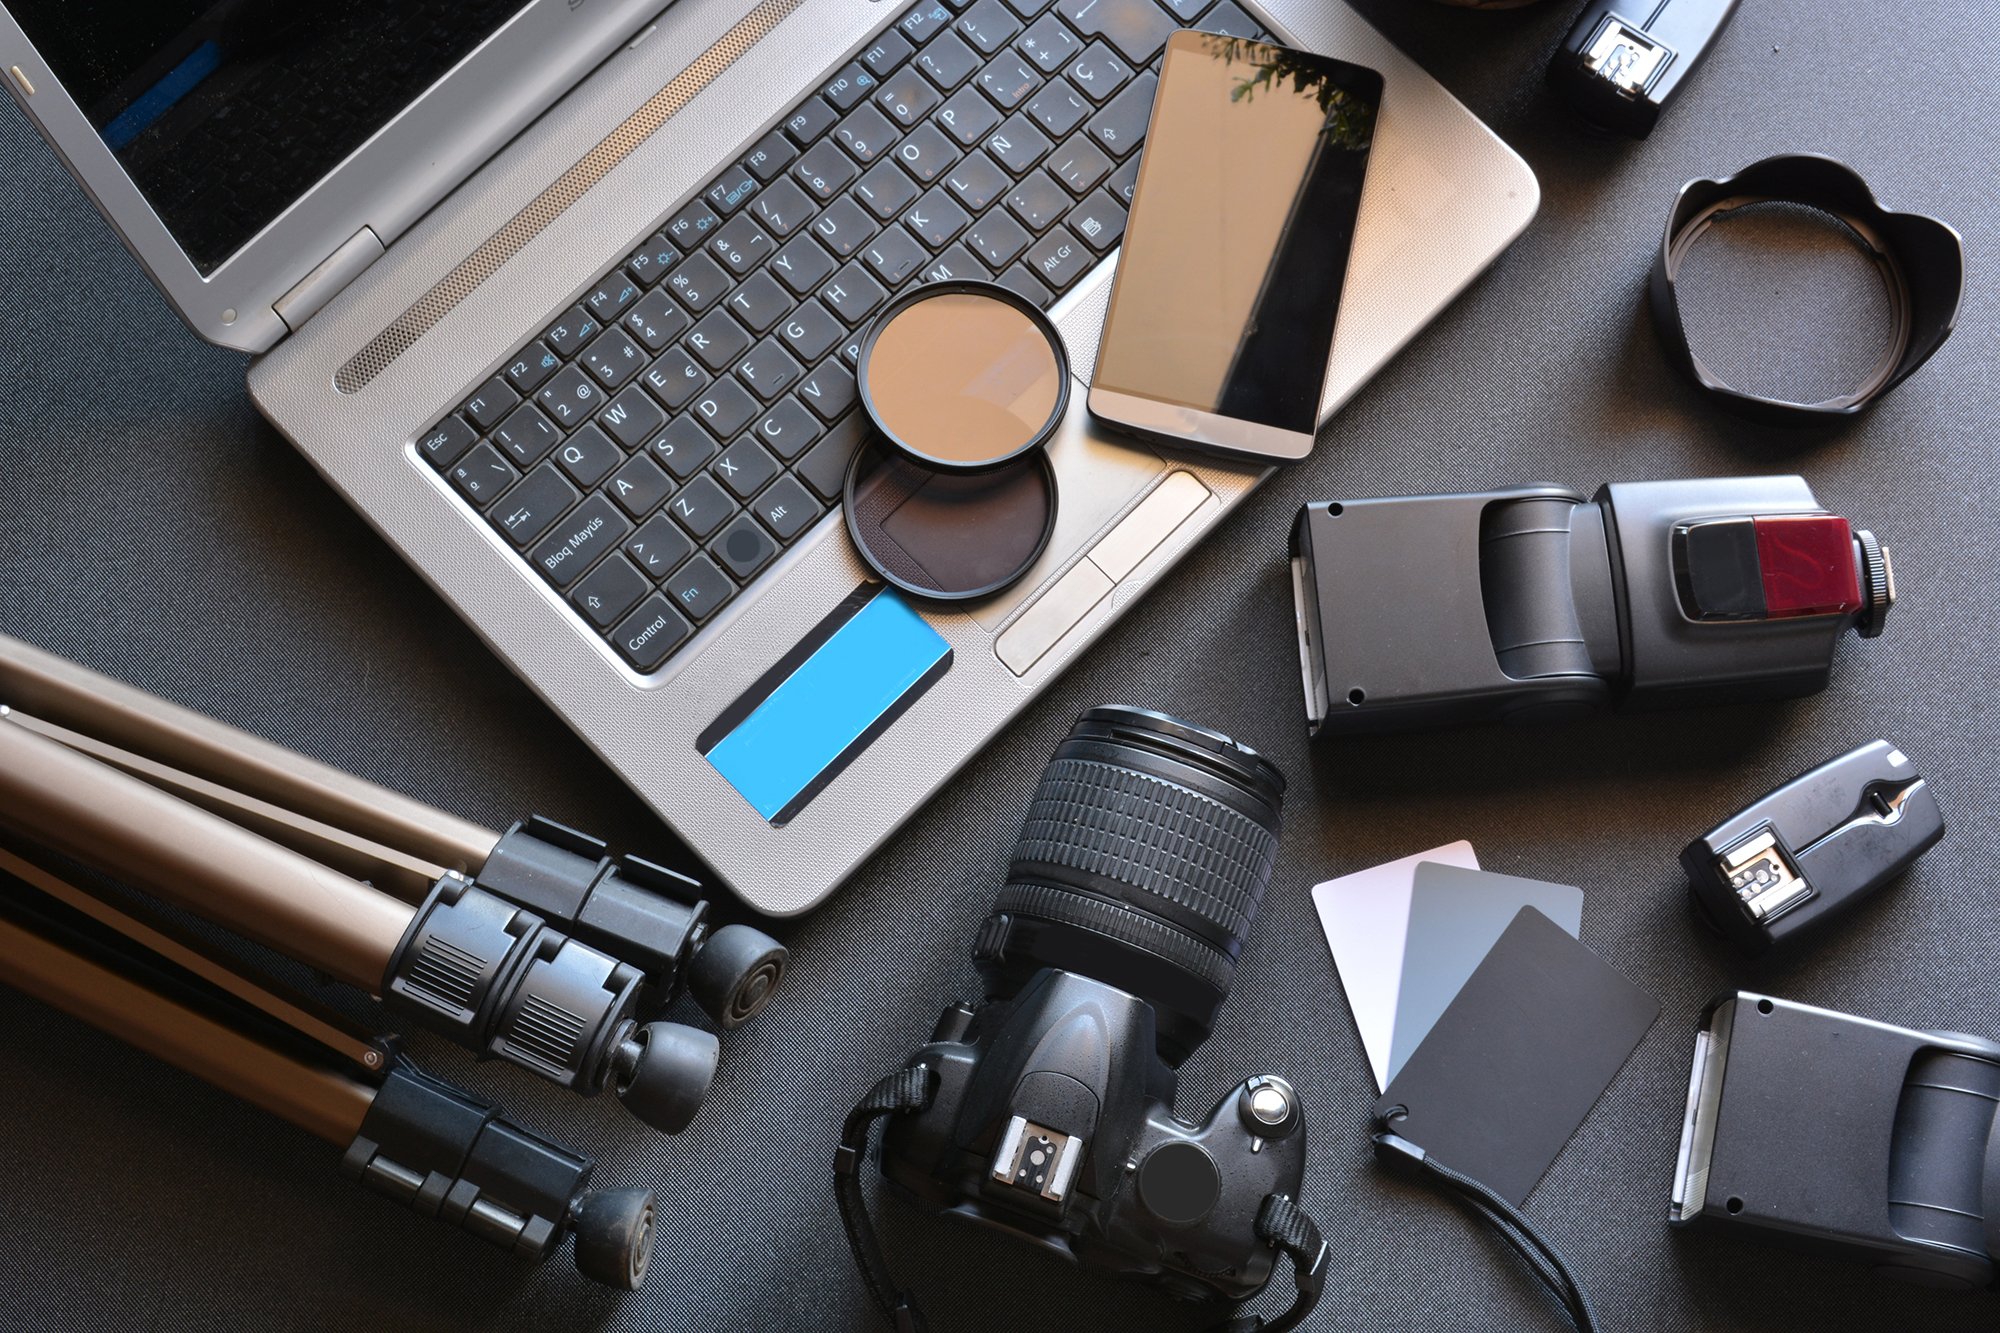 Top down image of Photography Equipment on table